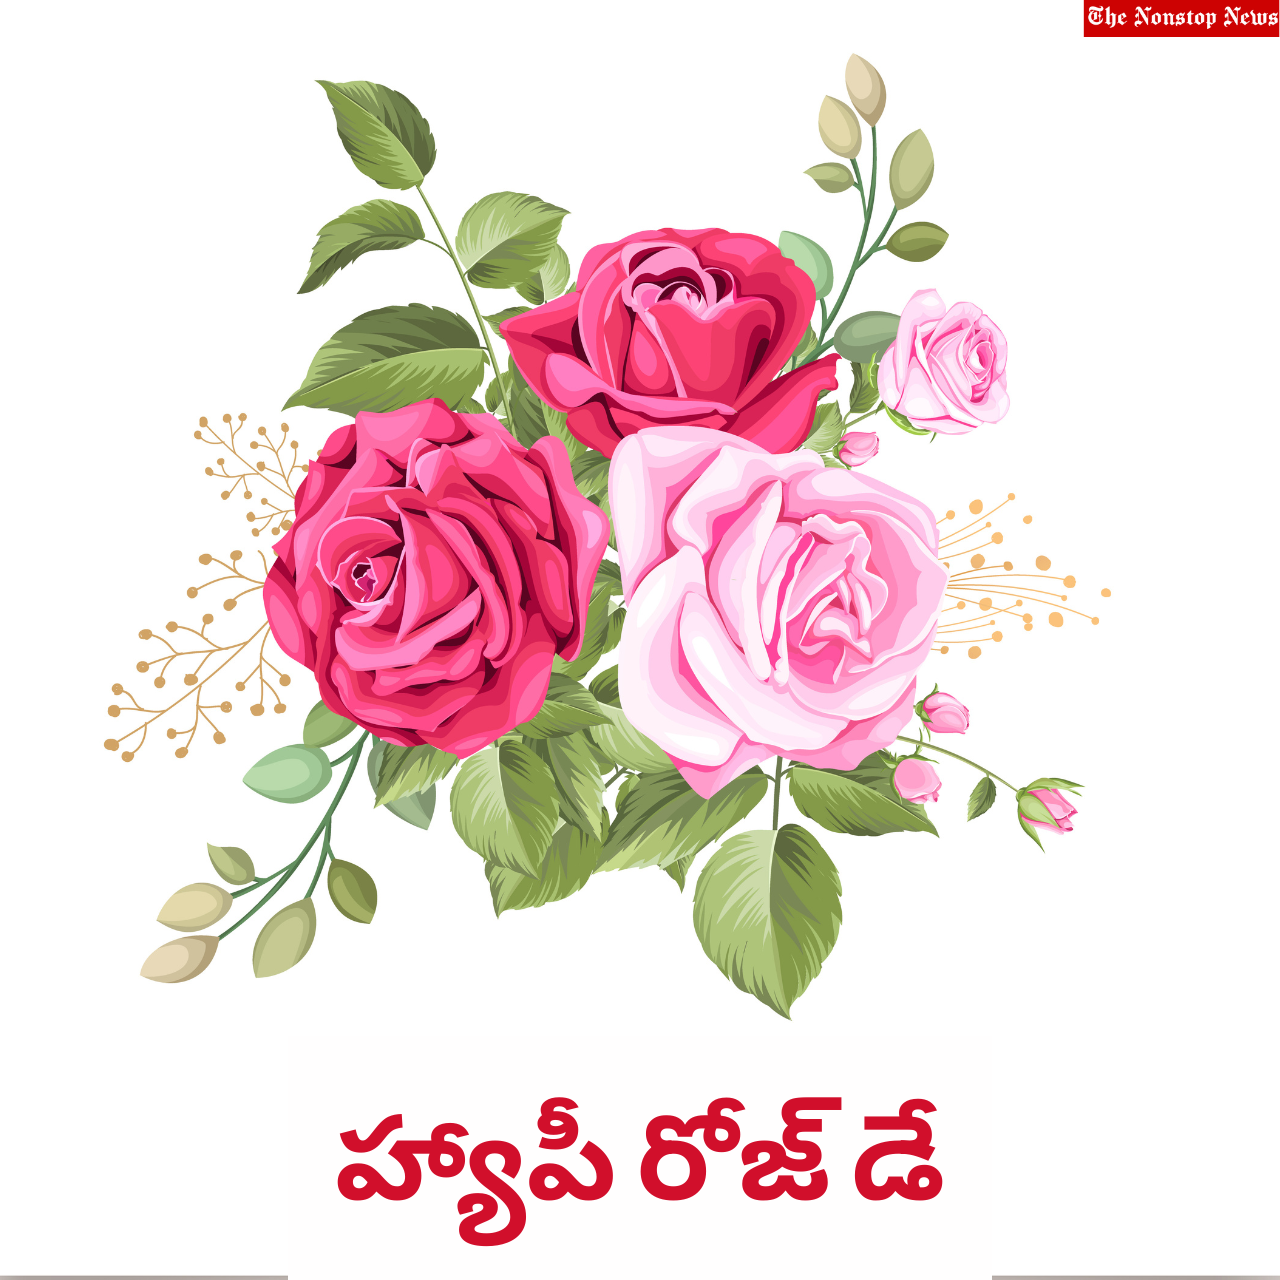 Happy Rose Day 2023 Telugu and Kannada Images, Sayings, Greetings, Images, Wishes, Messages, Shayari and Quotes